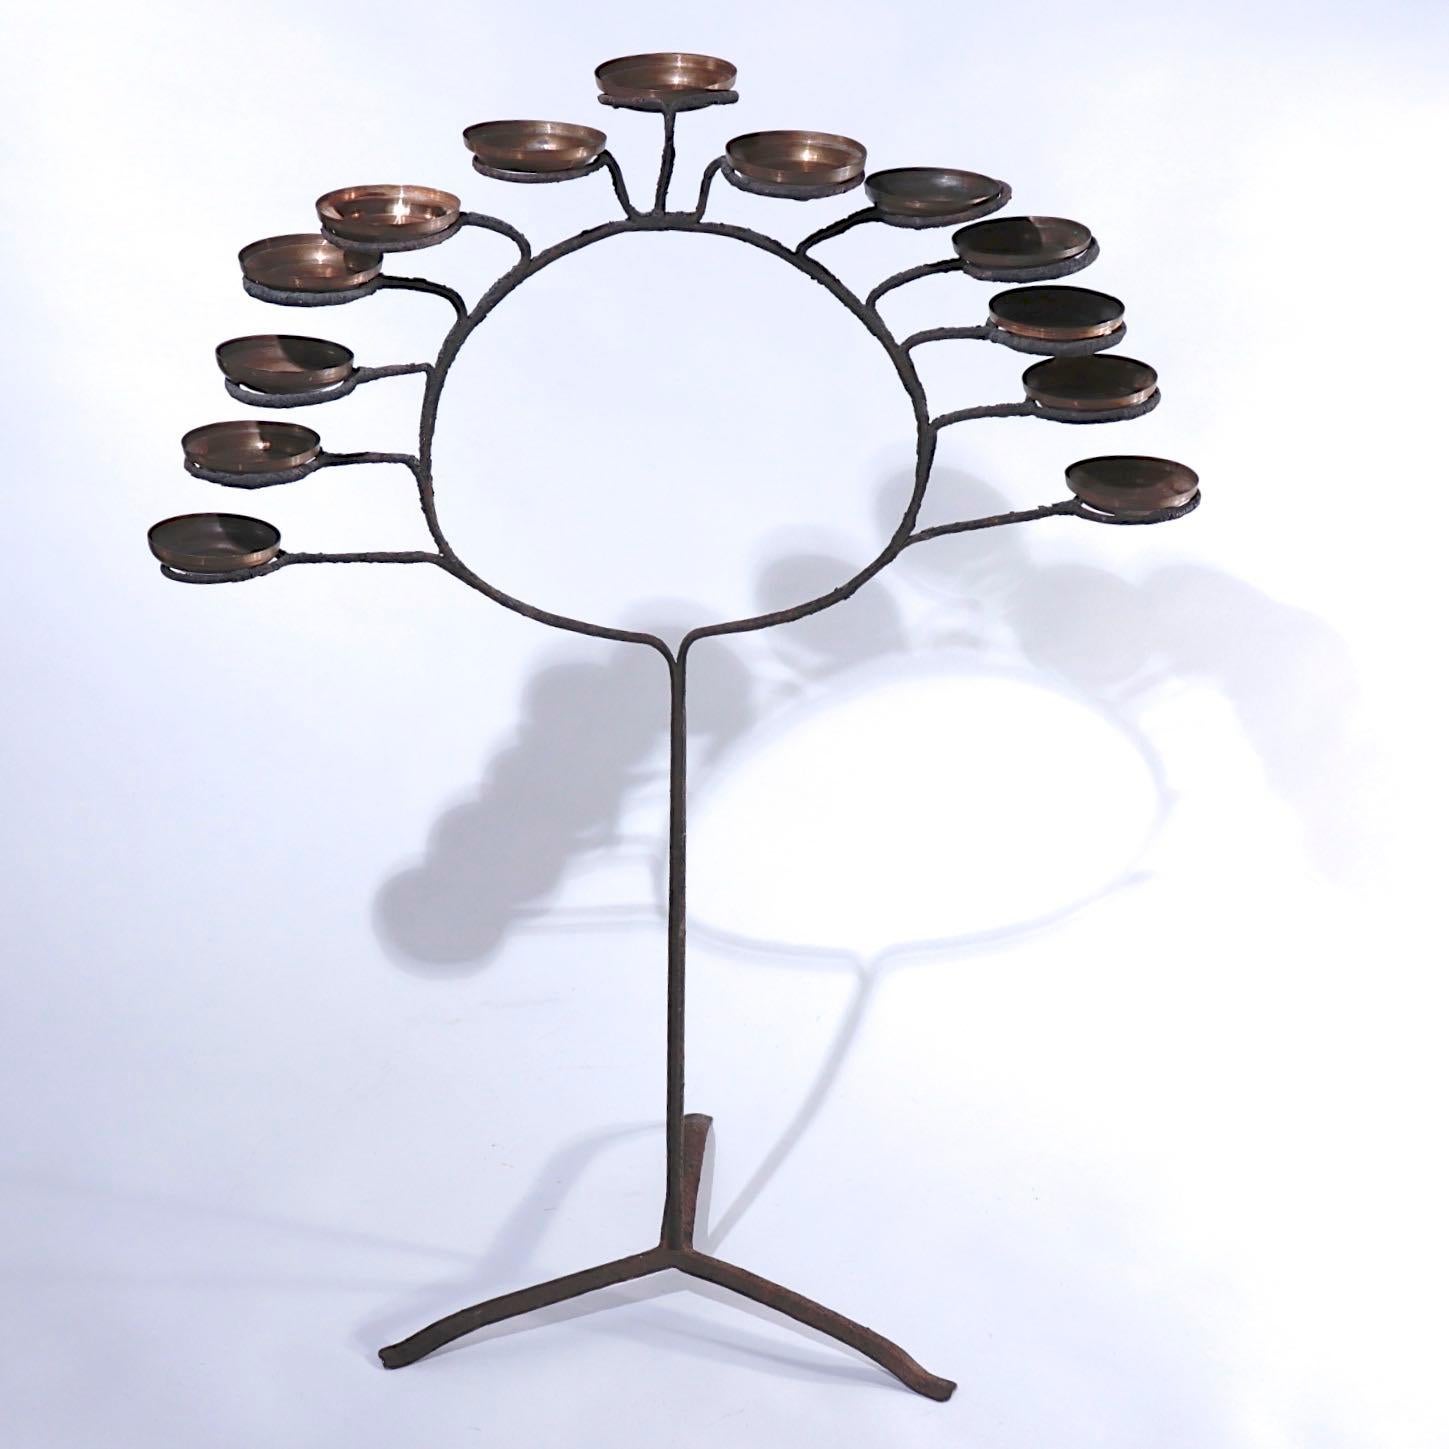 Japanese Tomyodai, a temple light stand created of hand wrought iron in an upright form of a circle or 